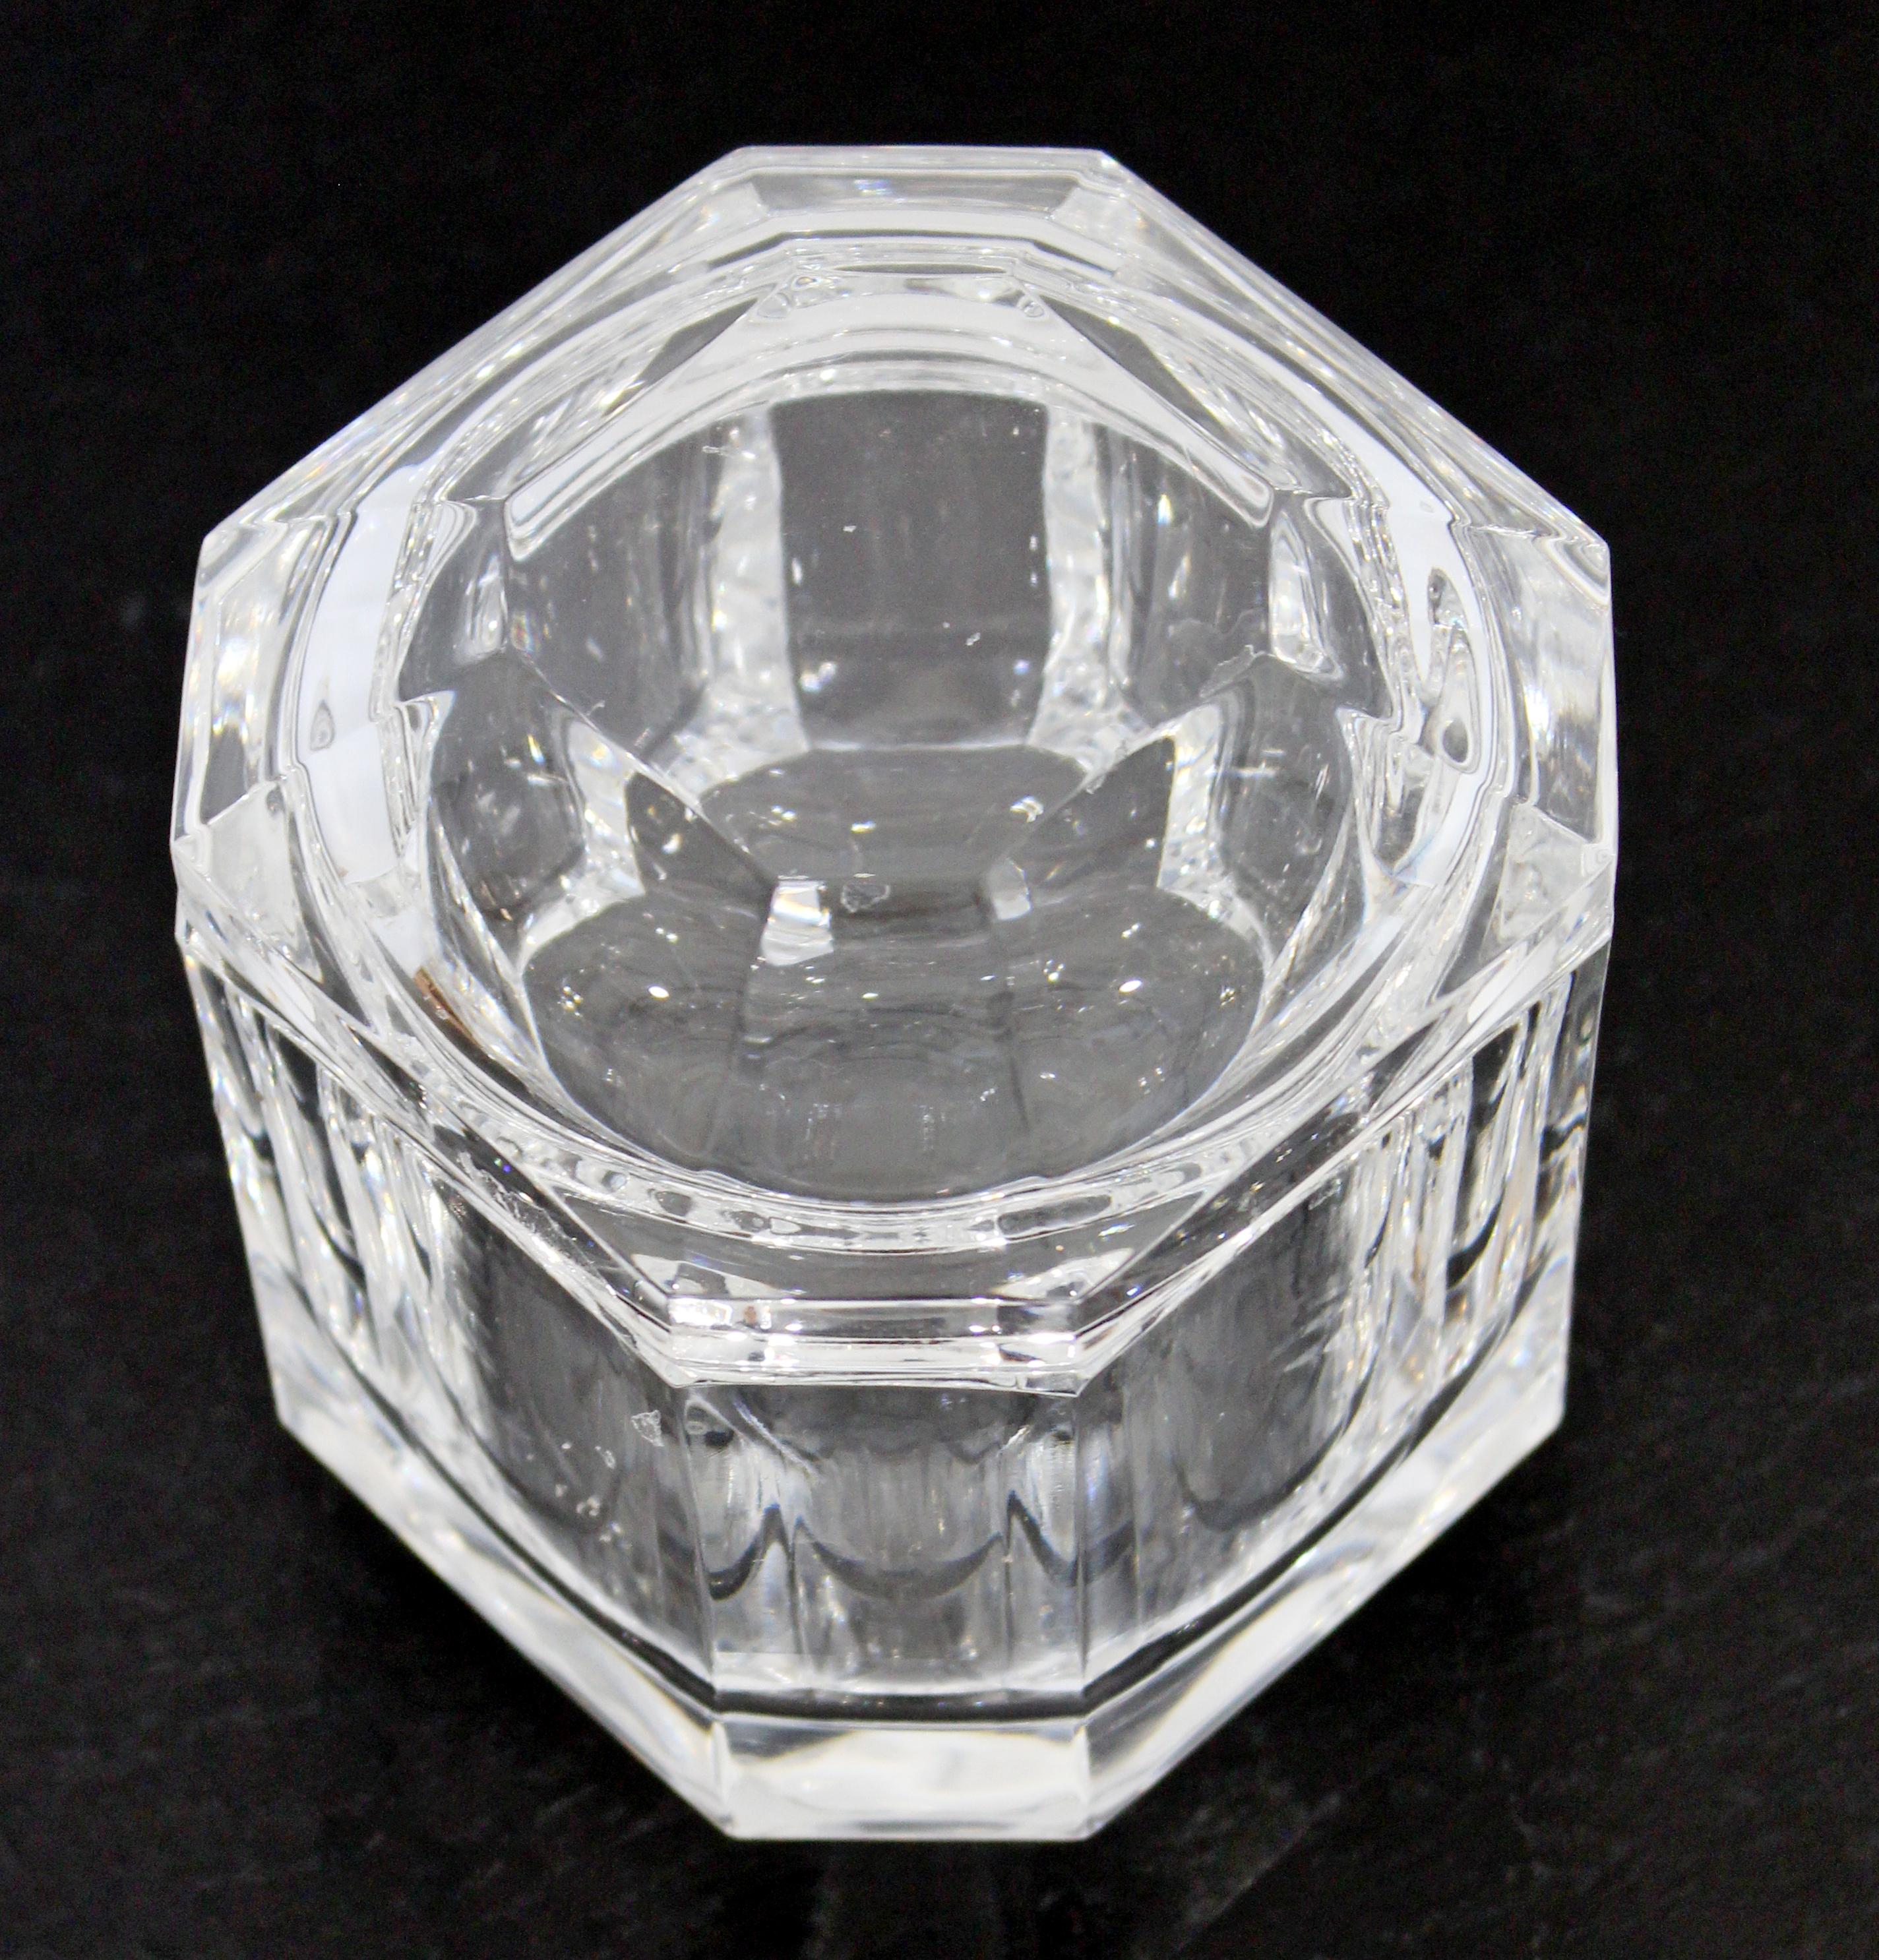 American Contemporary Tiffany & Co Signed Crystal Glass Lidded Jar Vessel Table Sculpture